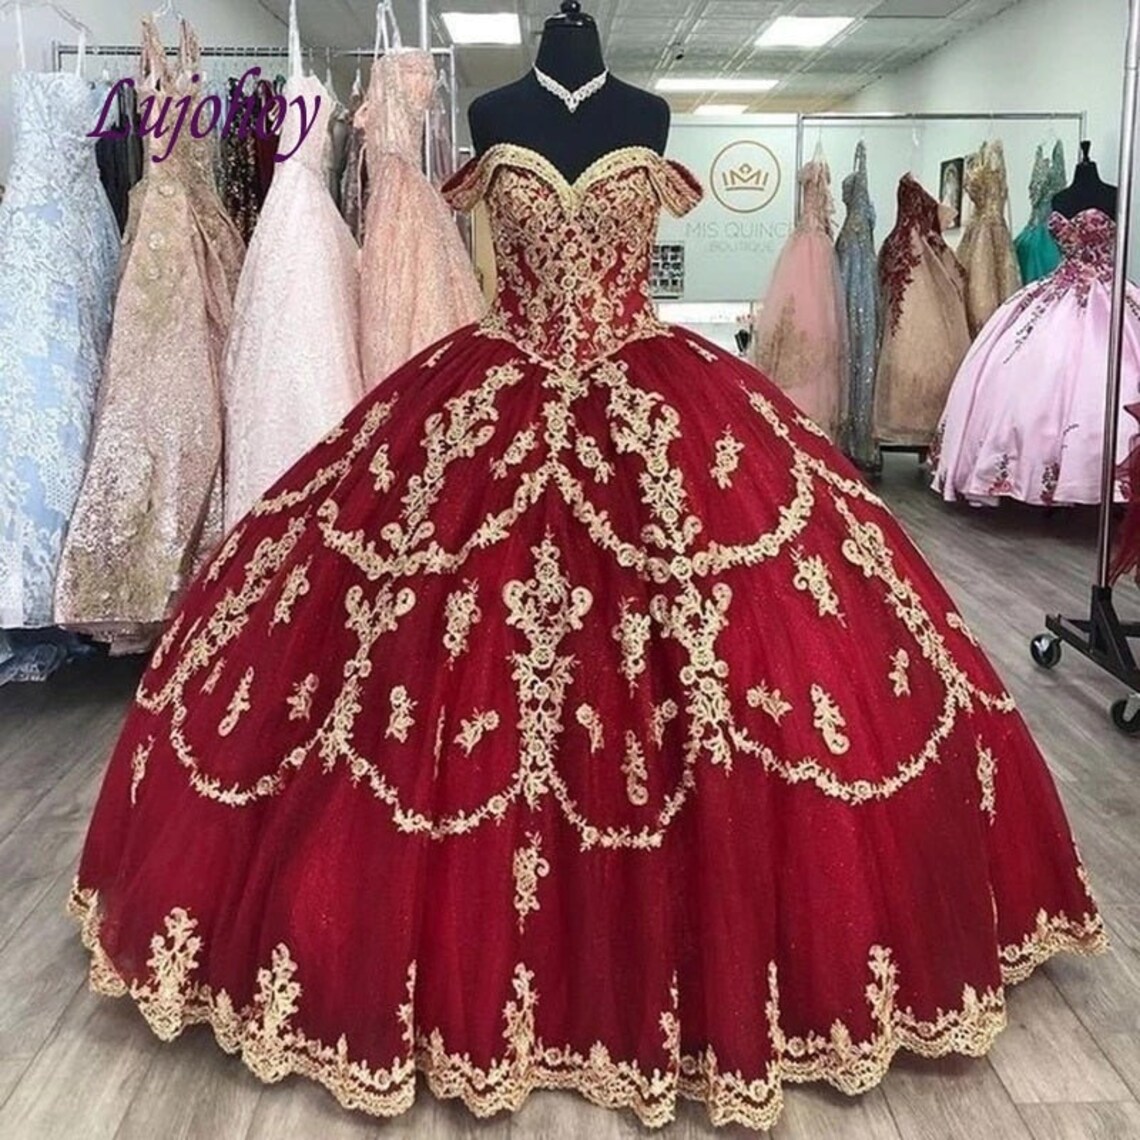 Designer Off Shoulder Glitter Quinceanera Dress Wine Red With Gold Lace Applique - Click Image to Close